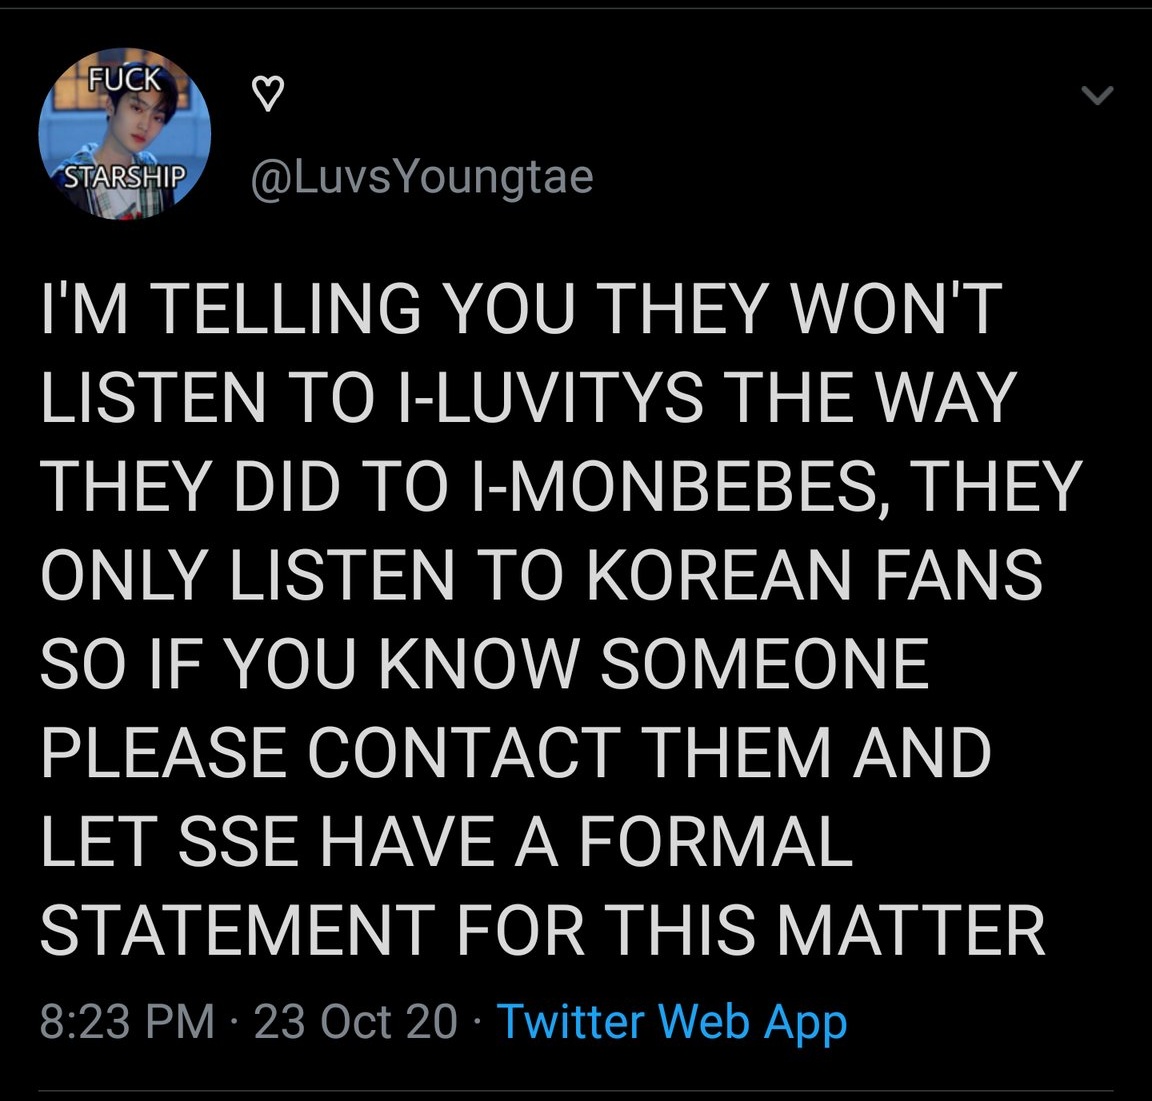 more tweets they stole from oomfs and paraphrased :)